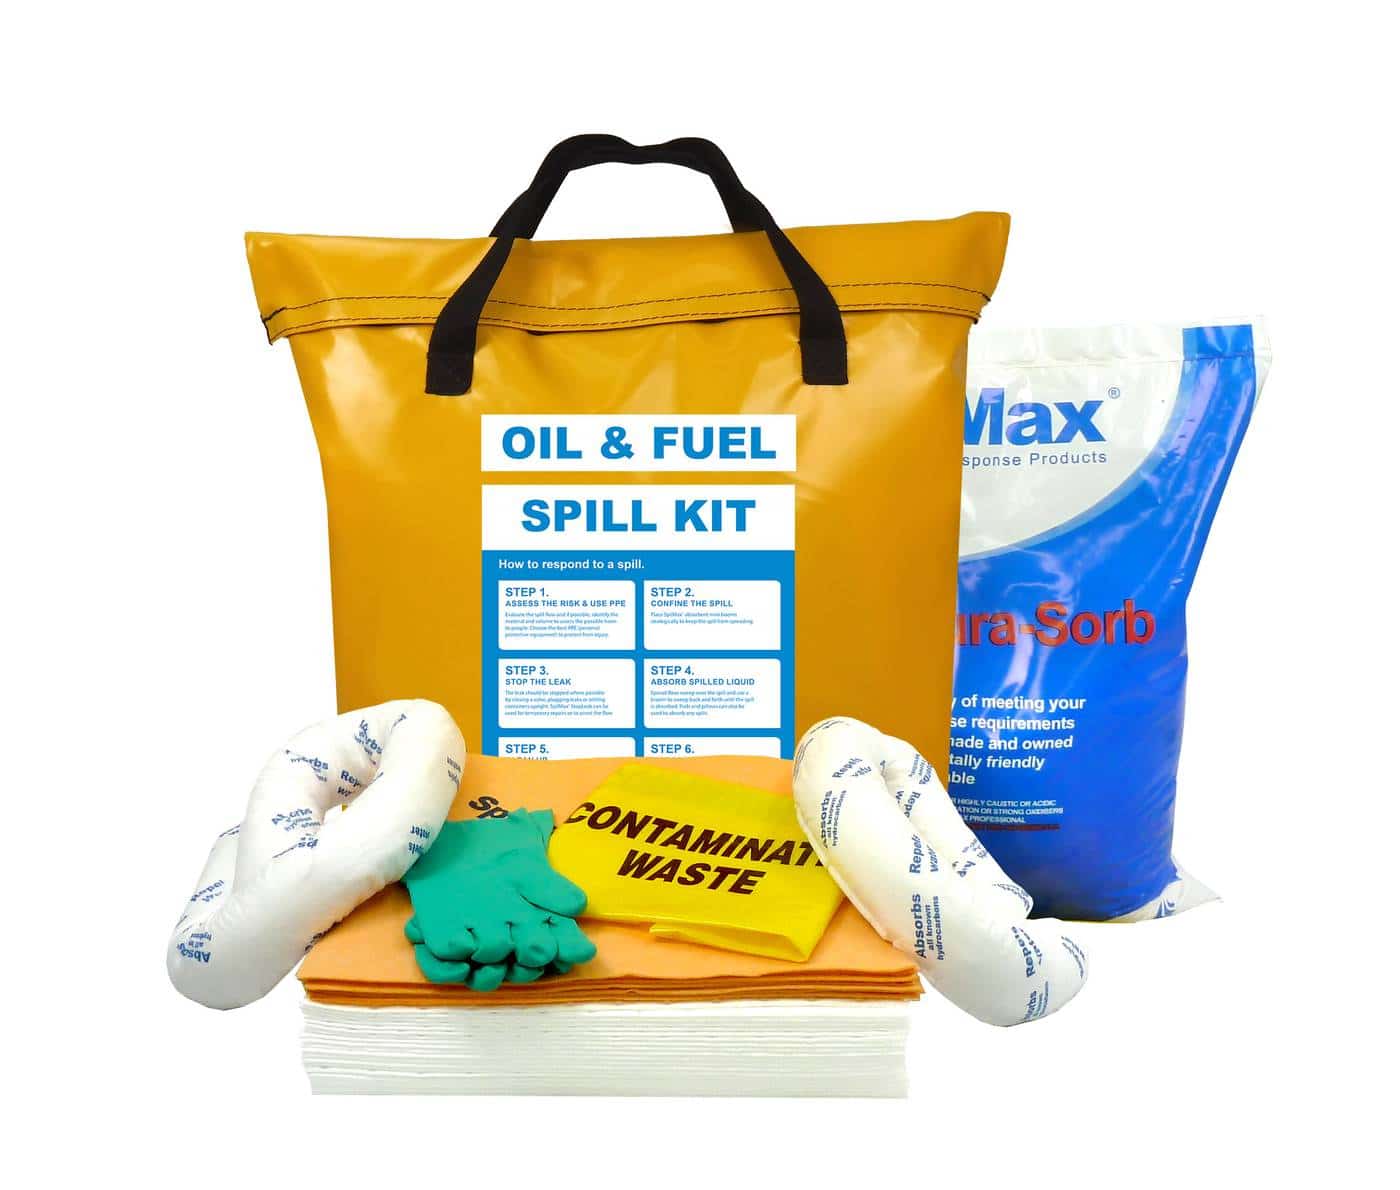 SpilMax 60L Oil & Fuel Vehicle Spill Kit Bag with contents showing